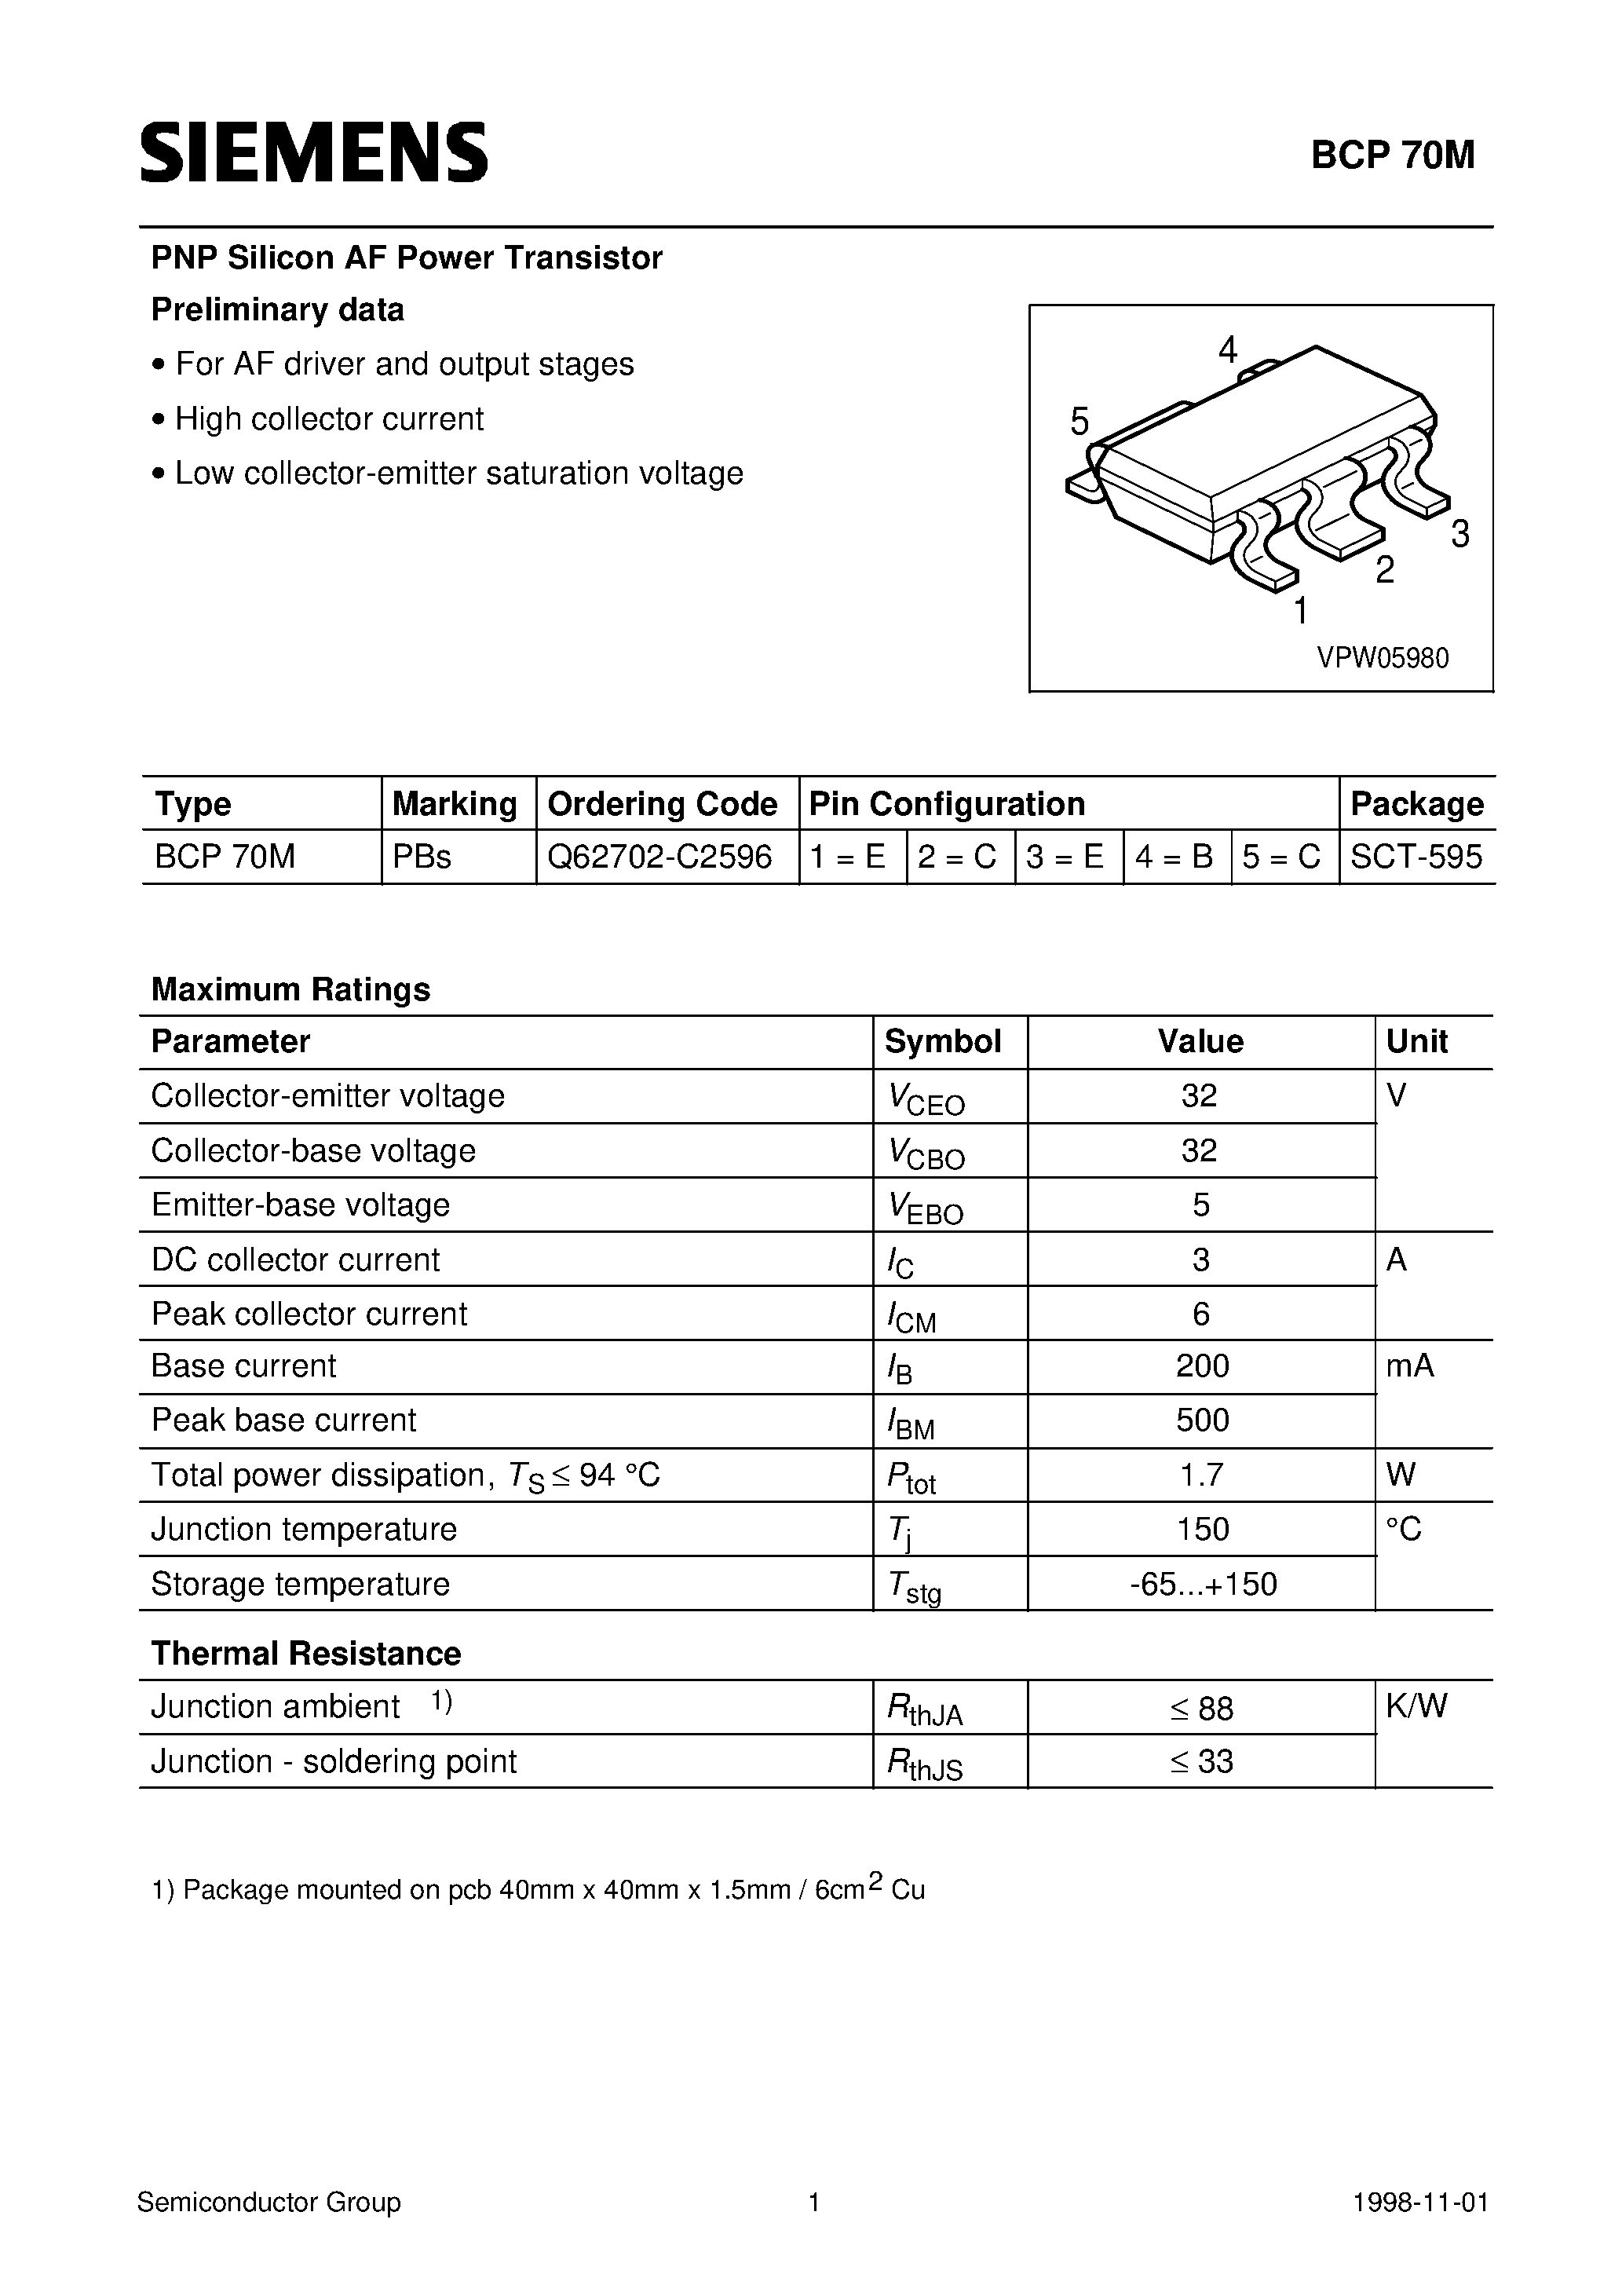 Datasheet BCP70M - PNP Silicon AF Power Transistor (For AF driver and output stages High collector current) page 1